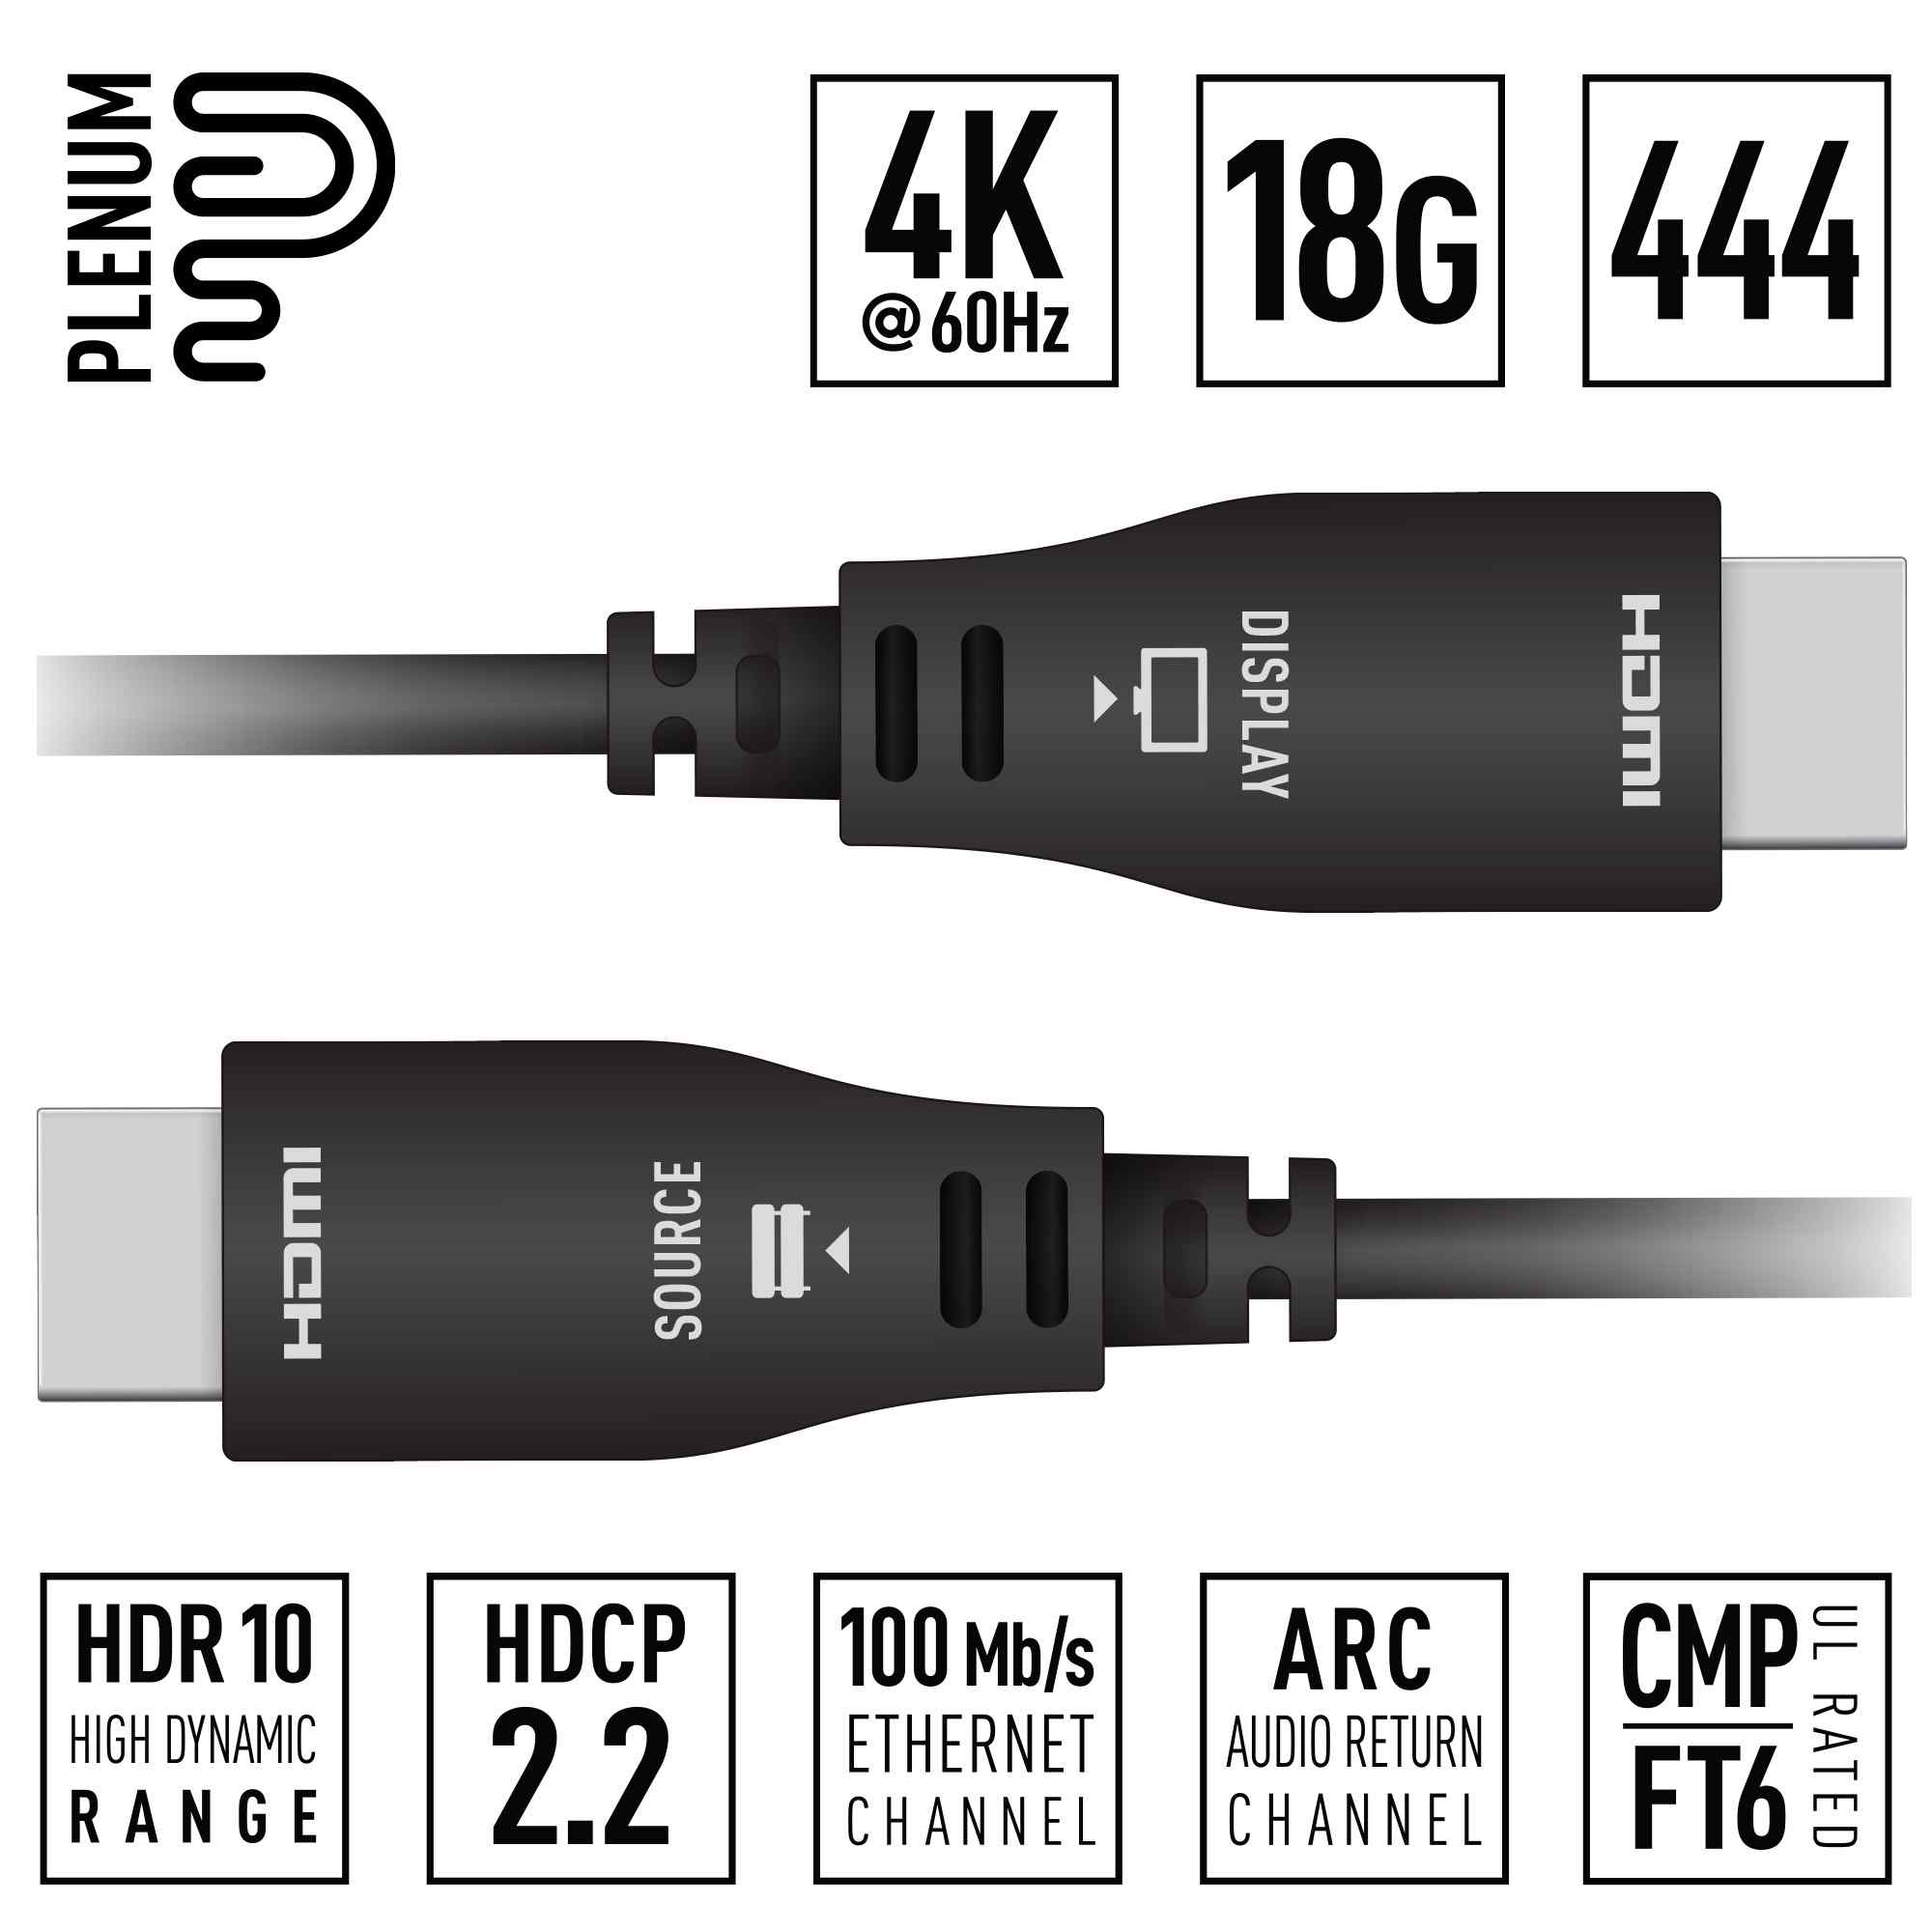 Key Digital 230FT (70M) 4K@60Hz/444/18G - Plenum Active Optical HDMI Cable, CMP/FT6 UL Rated - KD-AOCH230P